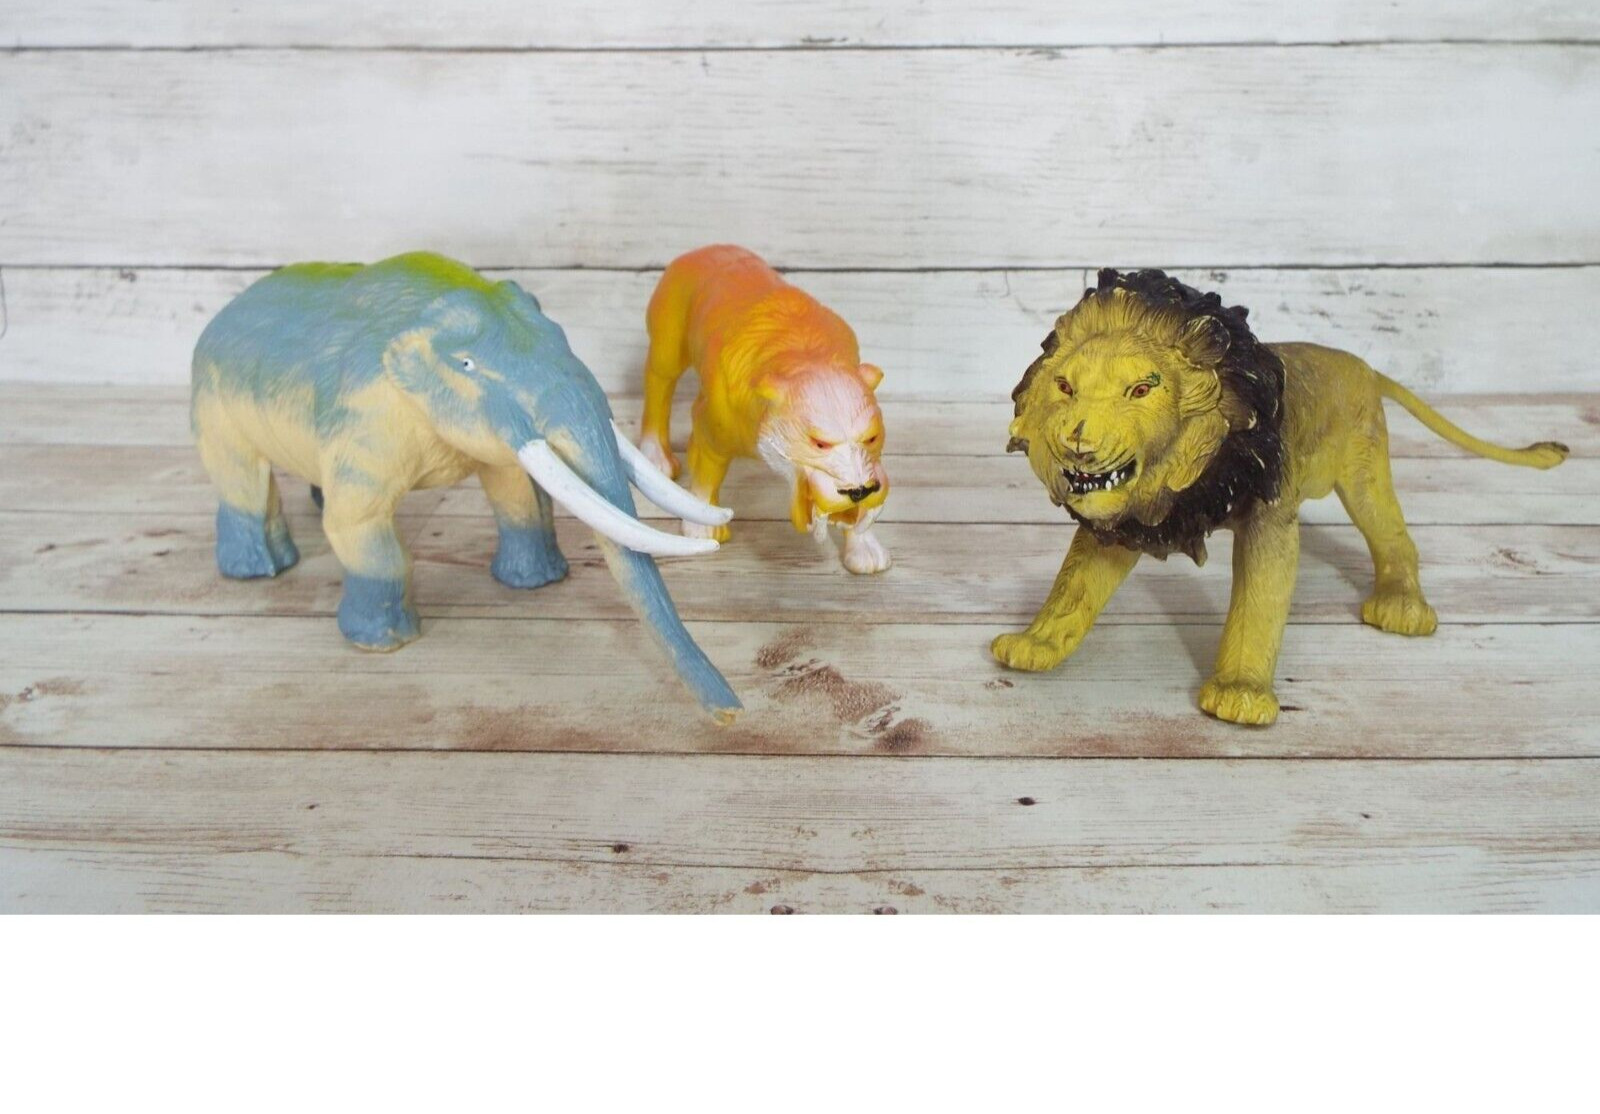 Lot of 3 Vintage Rubber Toy Animal Figures Imperial 1989 Mammoth Saber Tooth